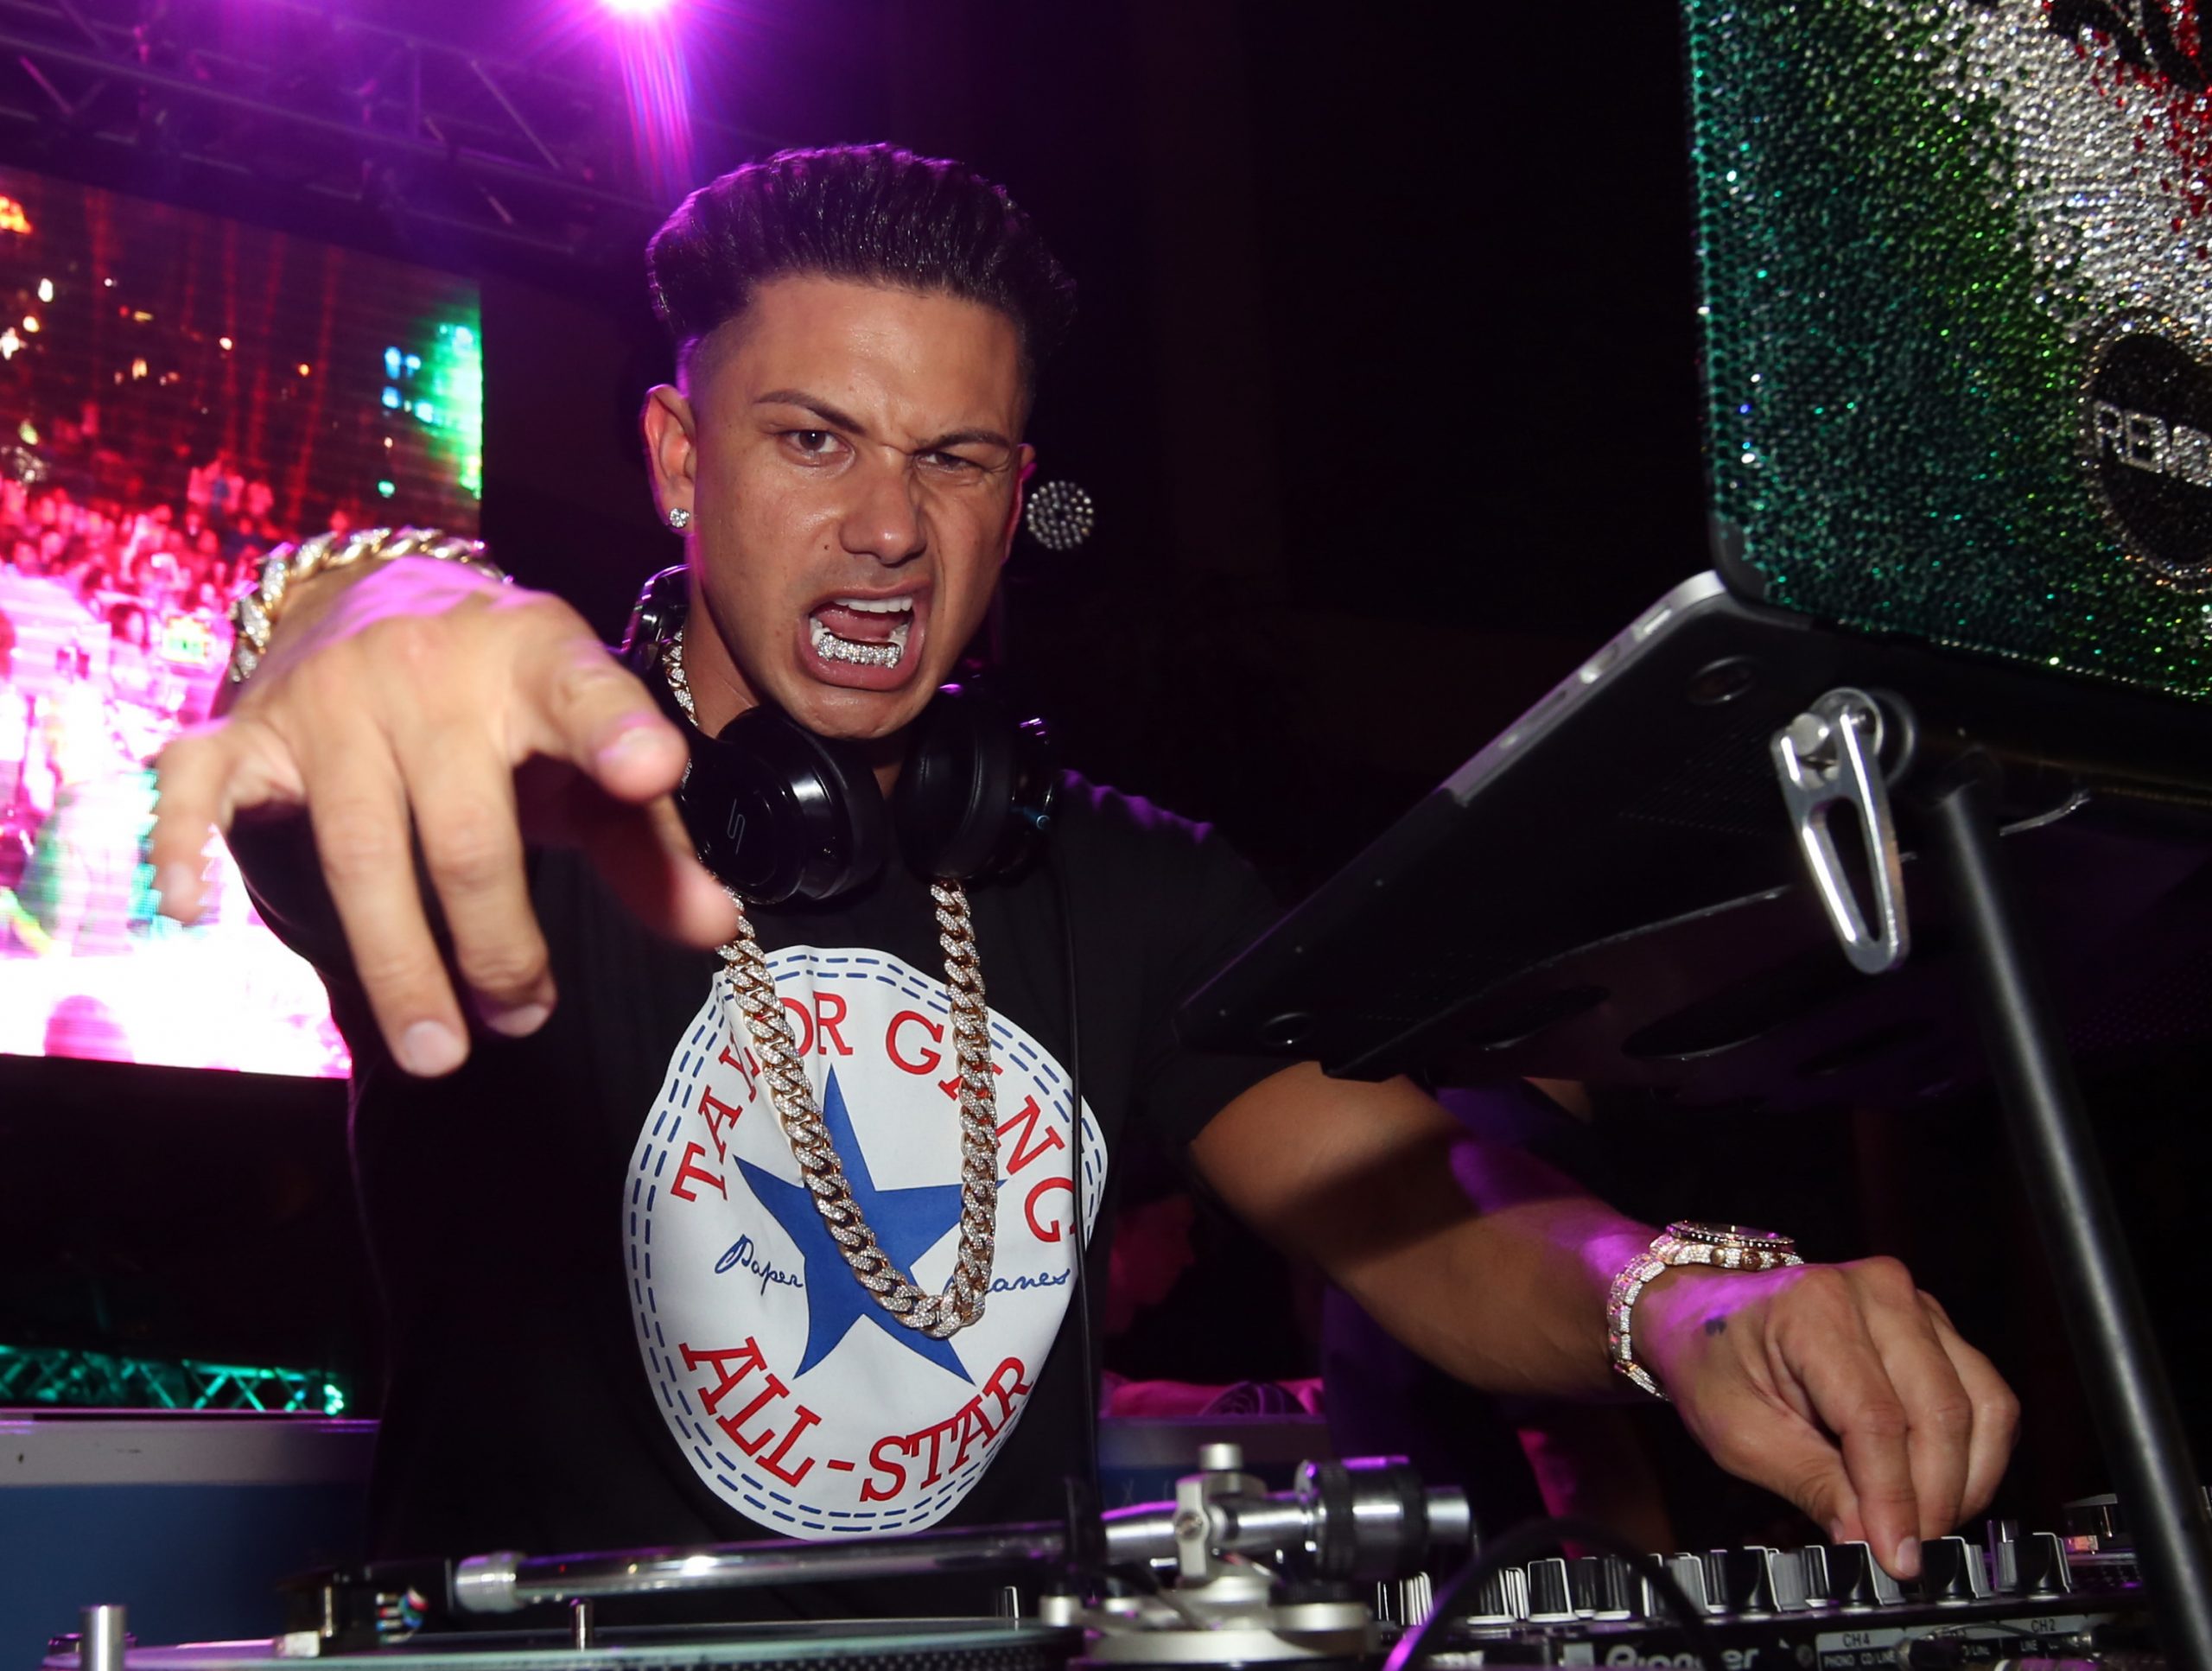 DJ Pauly D: Where to See ‘Jersey Shore: Family Vacation’ Star Pauly DelVecchio Live in 2022